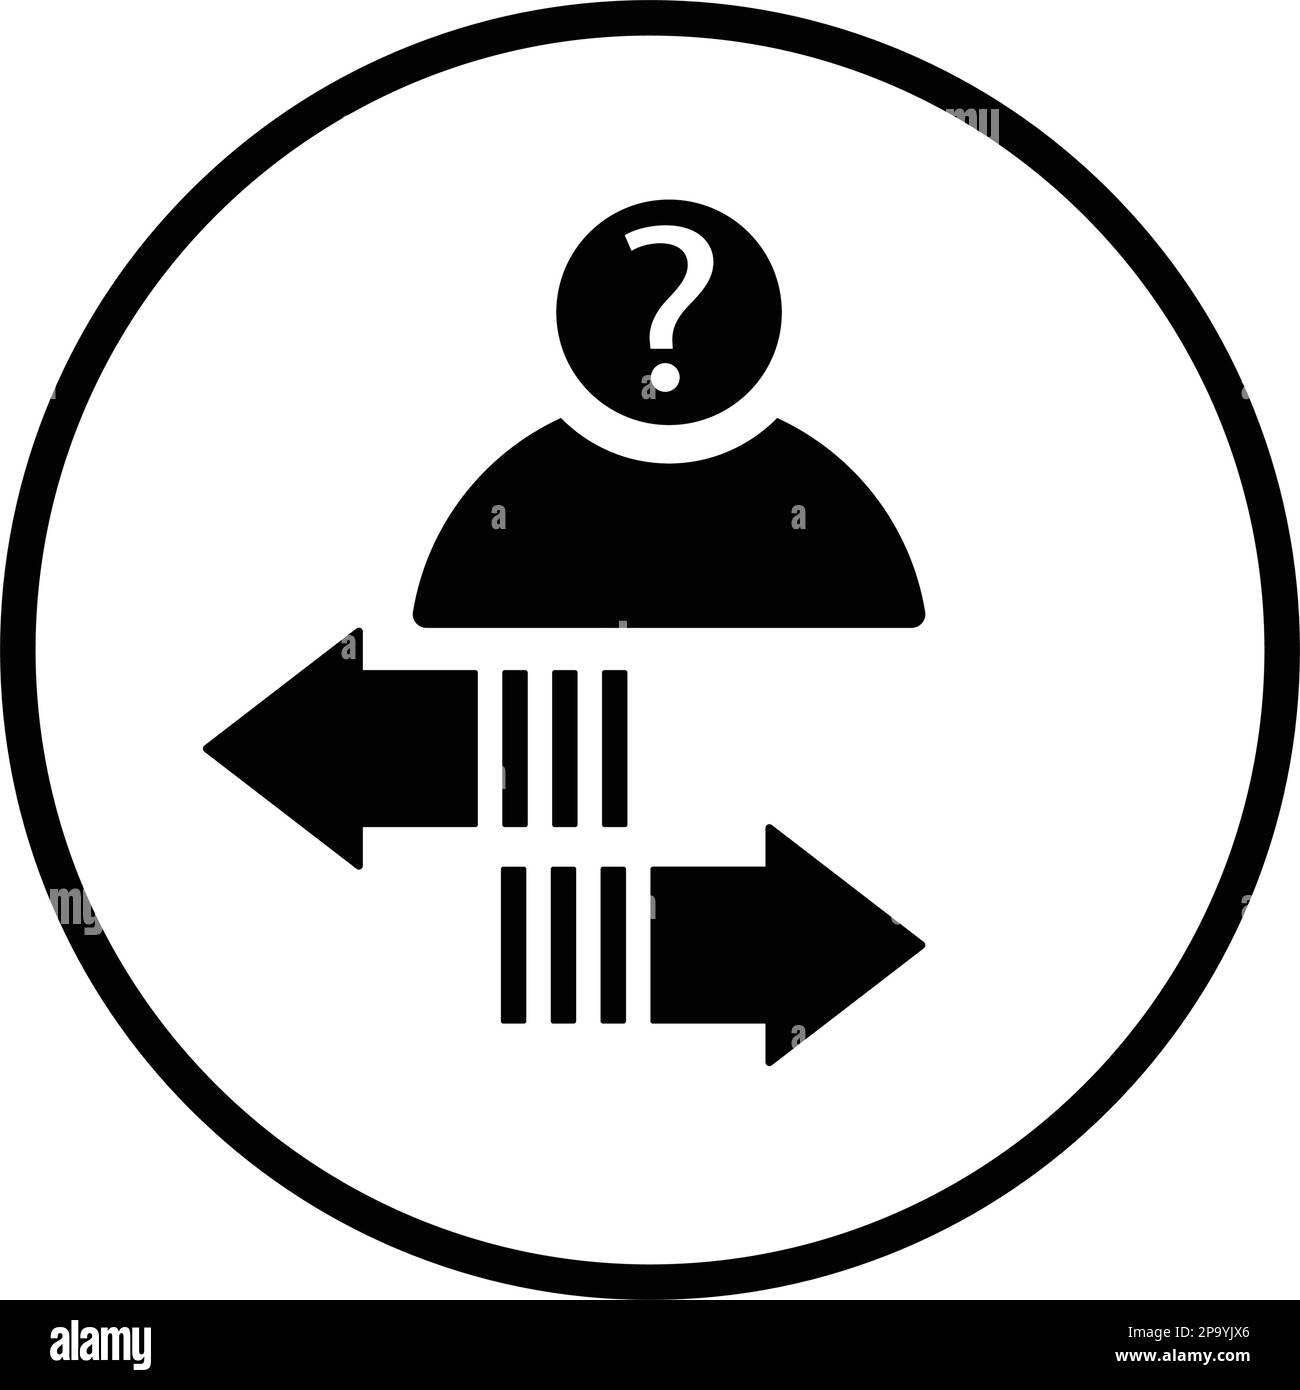 Confusion in Decision Making icon design template vector illustration for graphic and web design or commercial purposes. Stock Vector